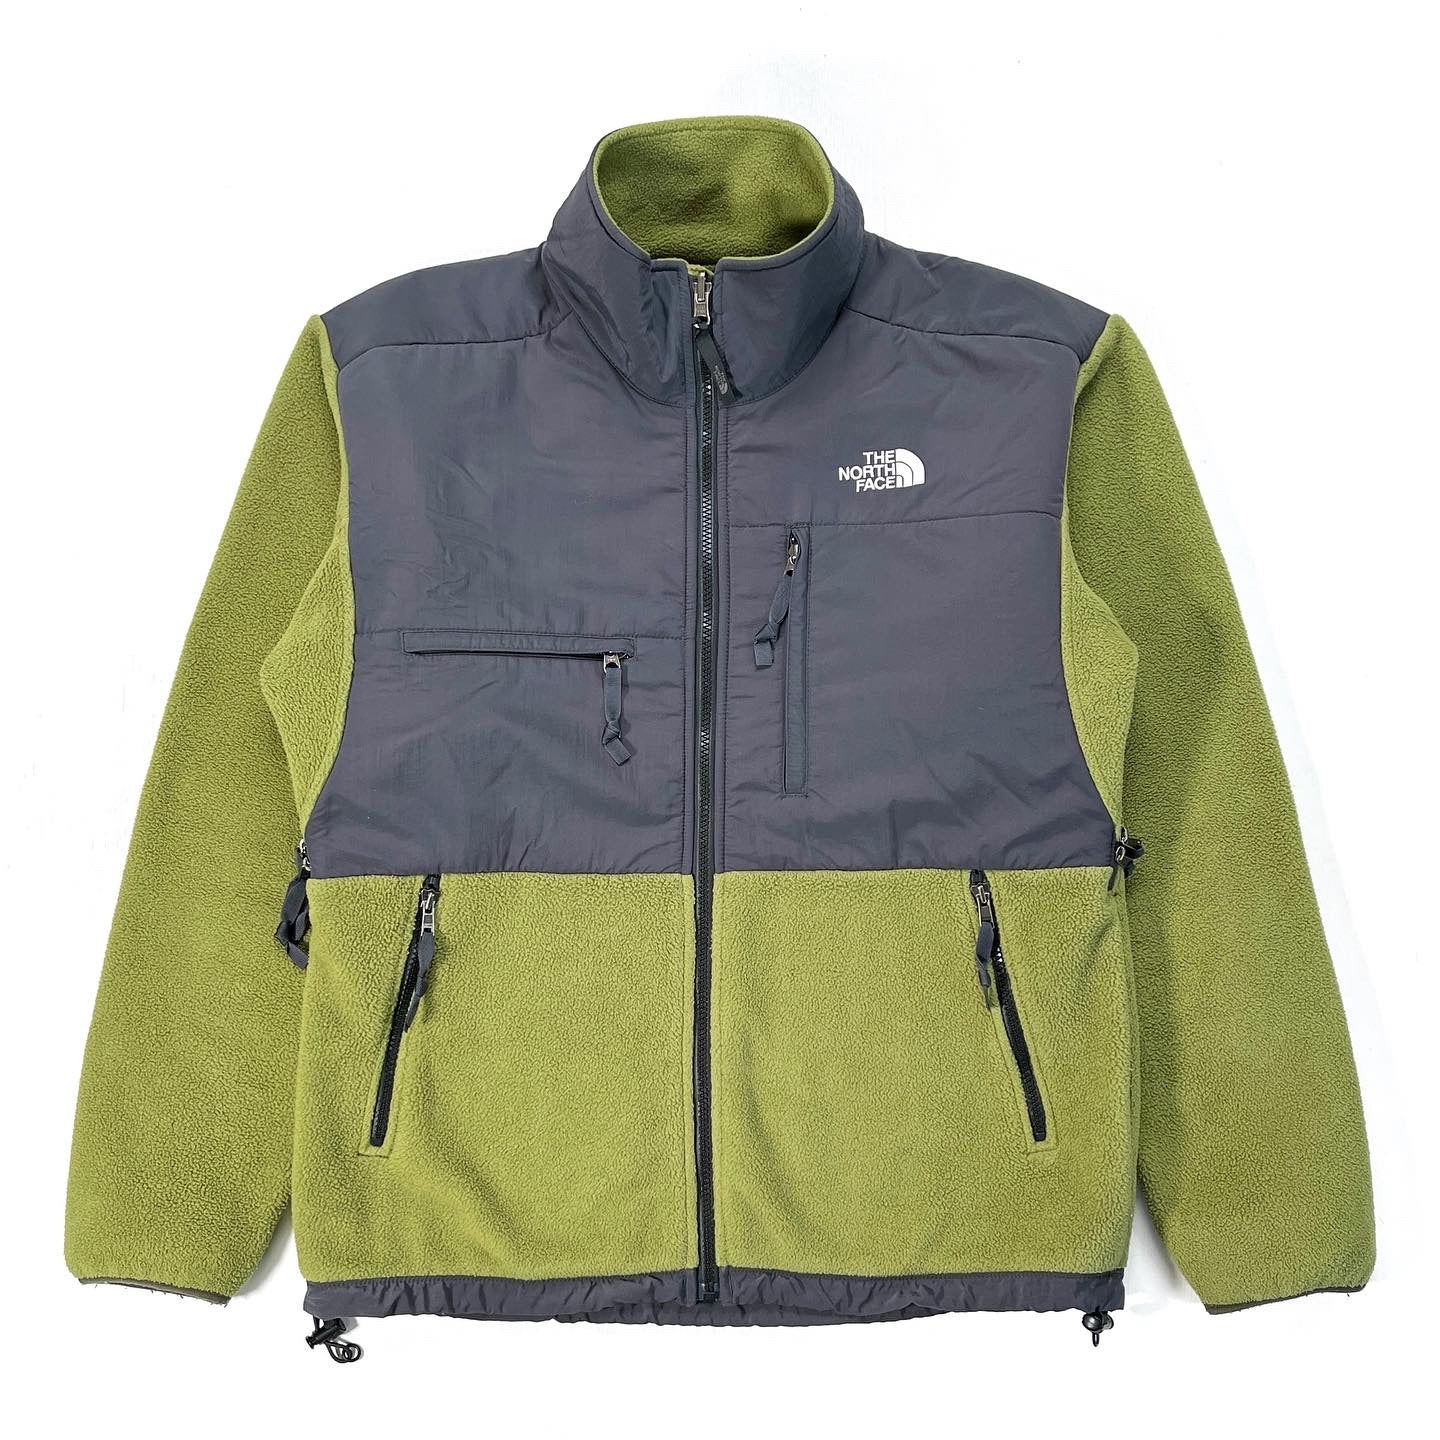 2000s The North Face Denali Fleece Jacket, Olive & Charcoal (S/M)